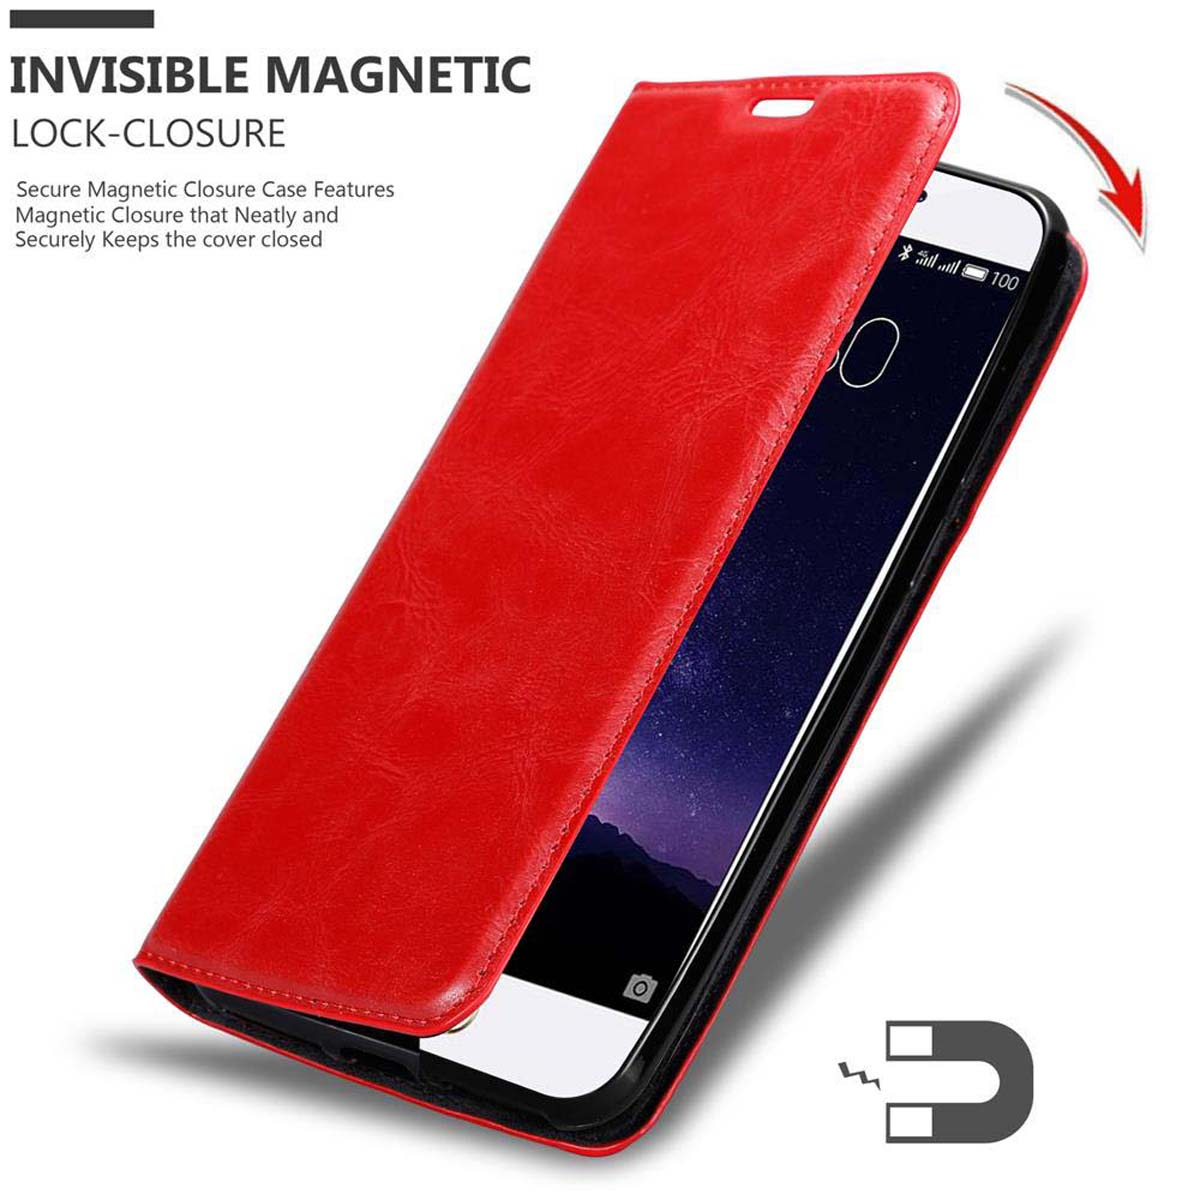 MX6, Book CADORABO Bookcover, ROT Magnet, Invisible MEIZU, Hülle APFEL